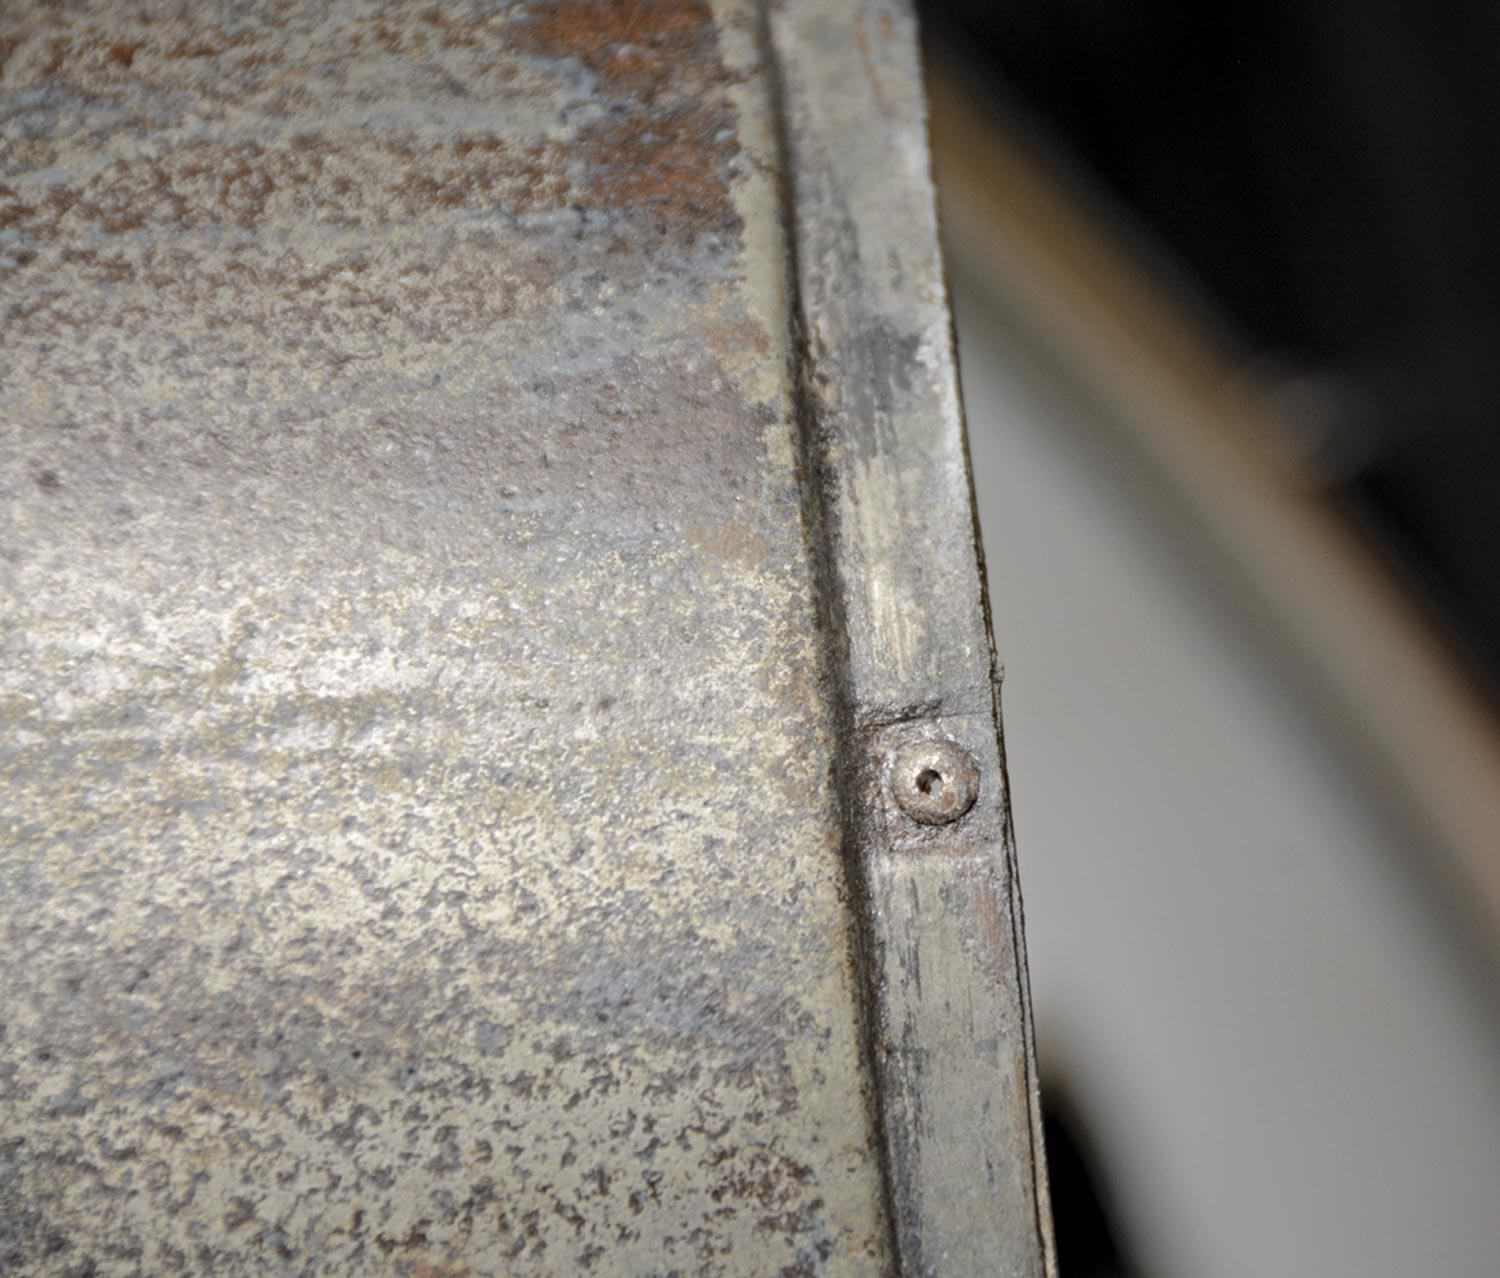 close view of a headless rivet on the light